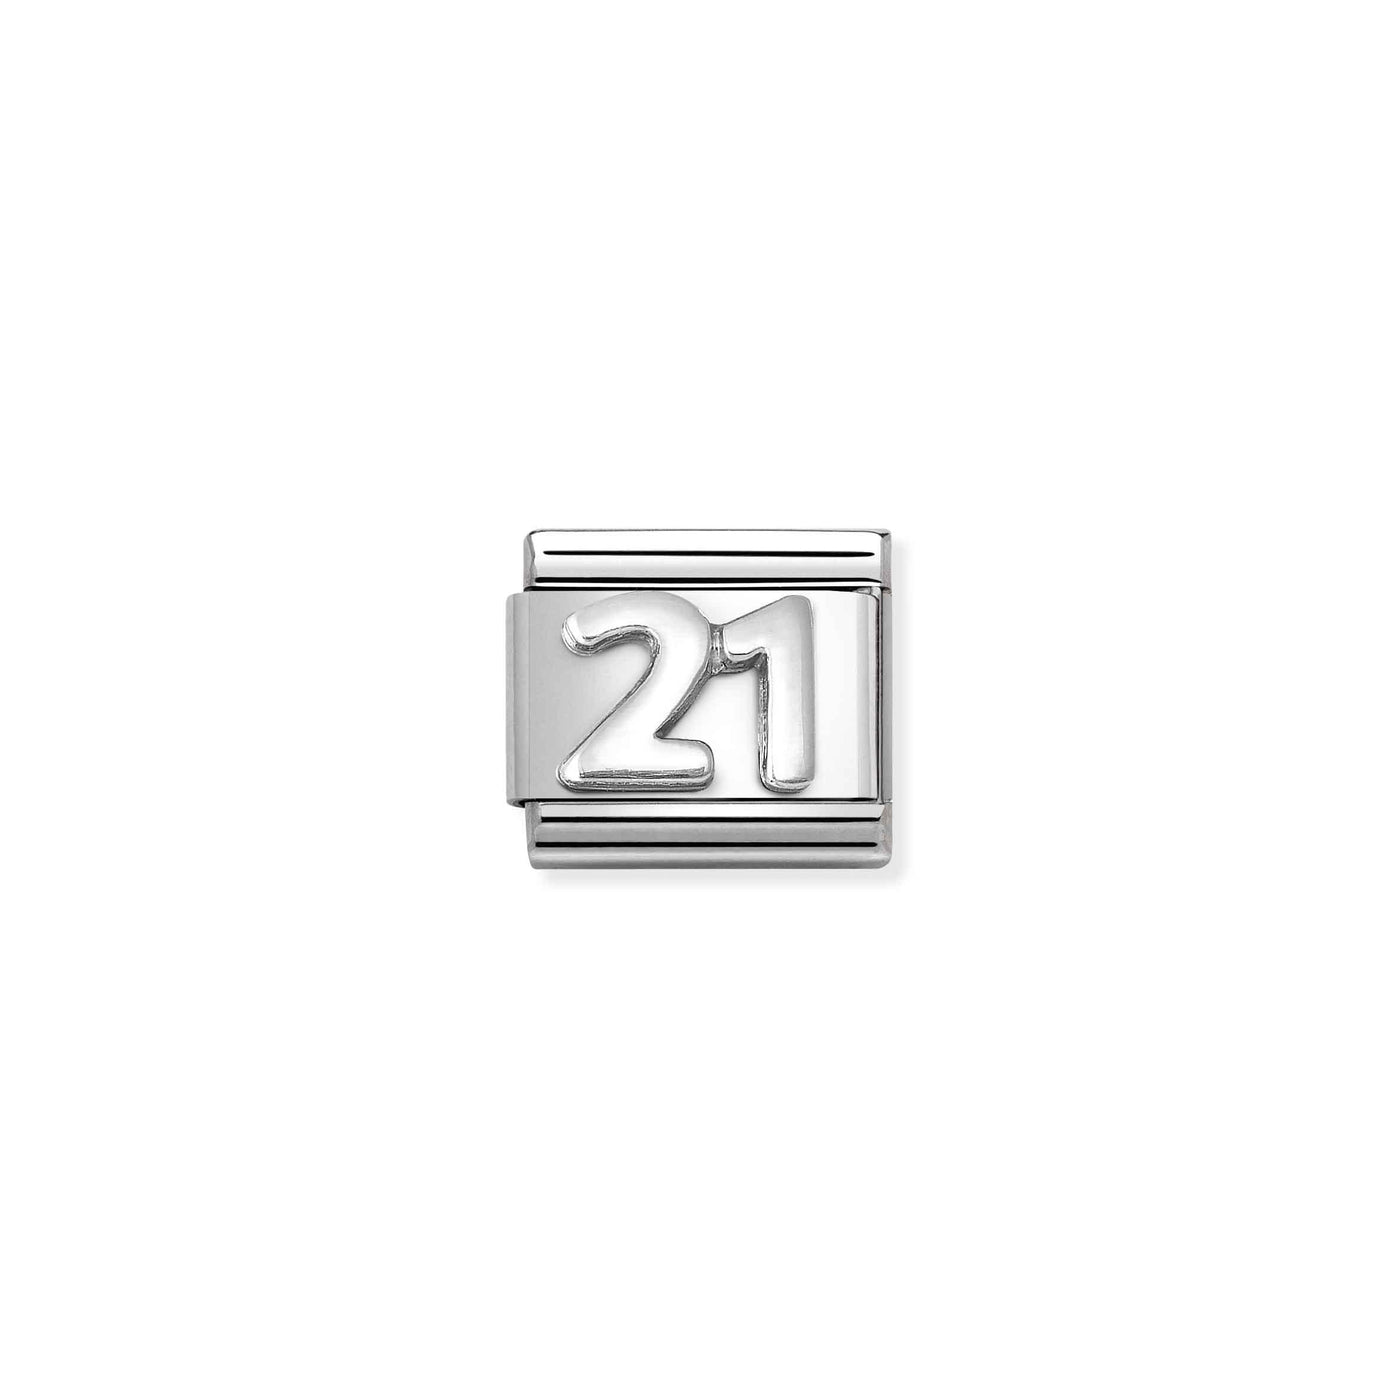 Nomination Classic Silver and Stainless Steel 21 Charm - Rococo Jewellery